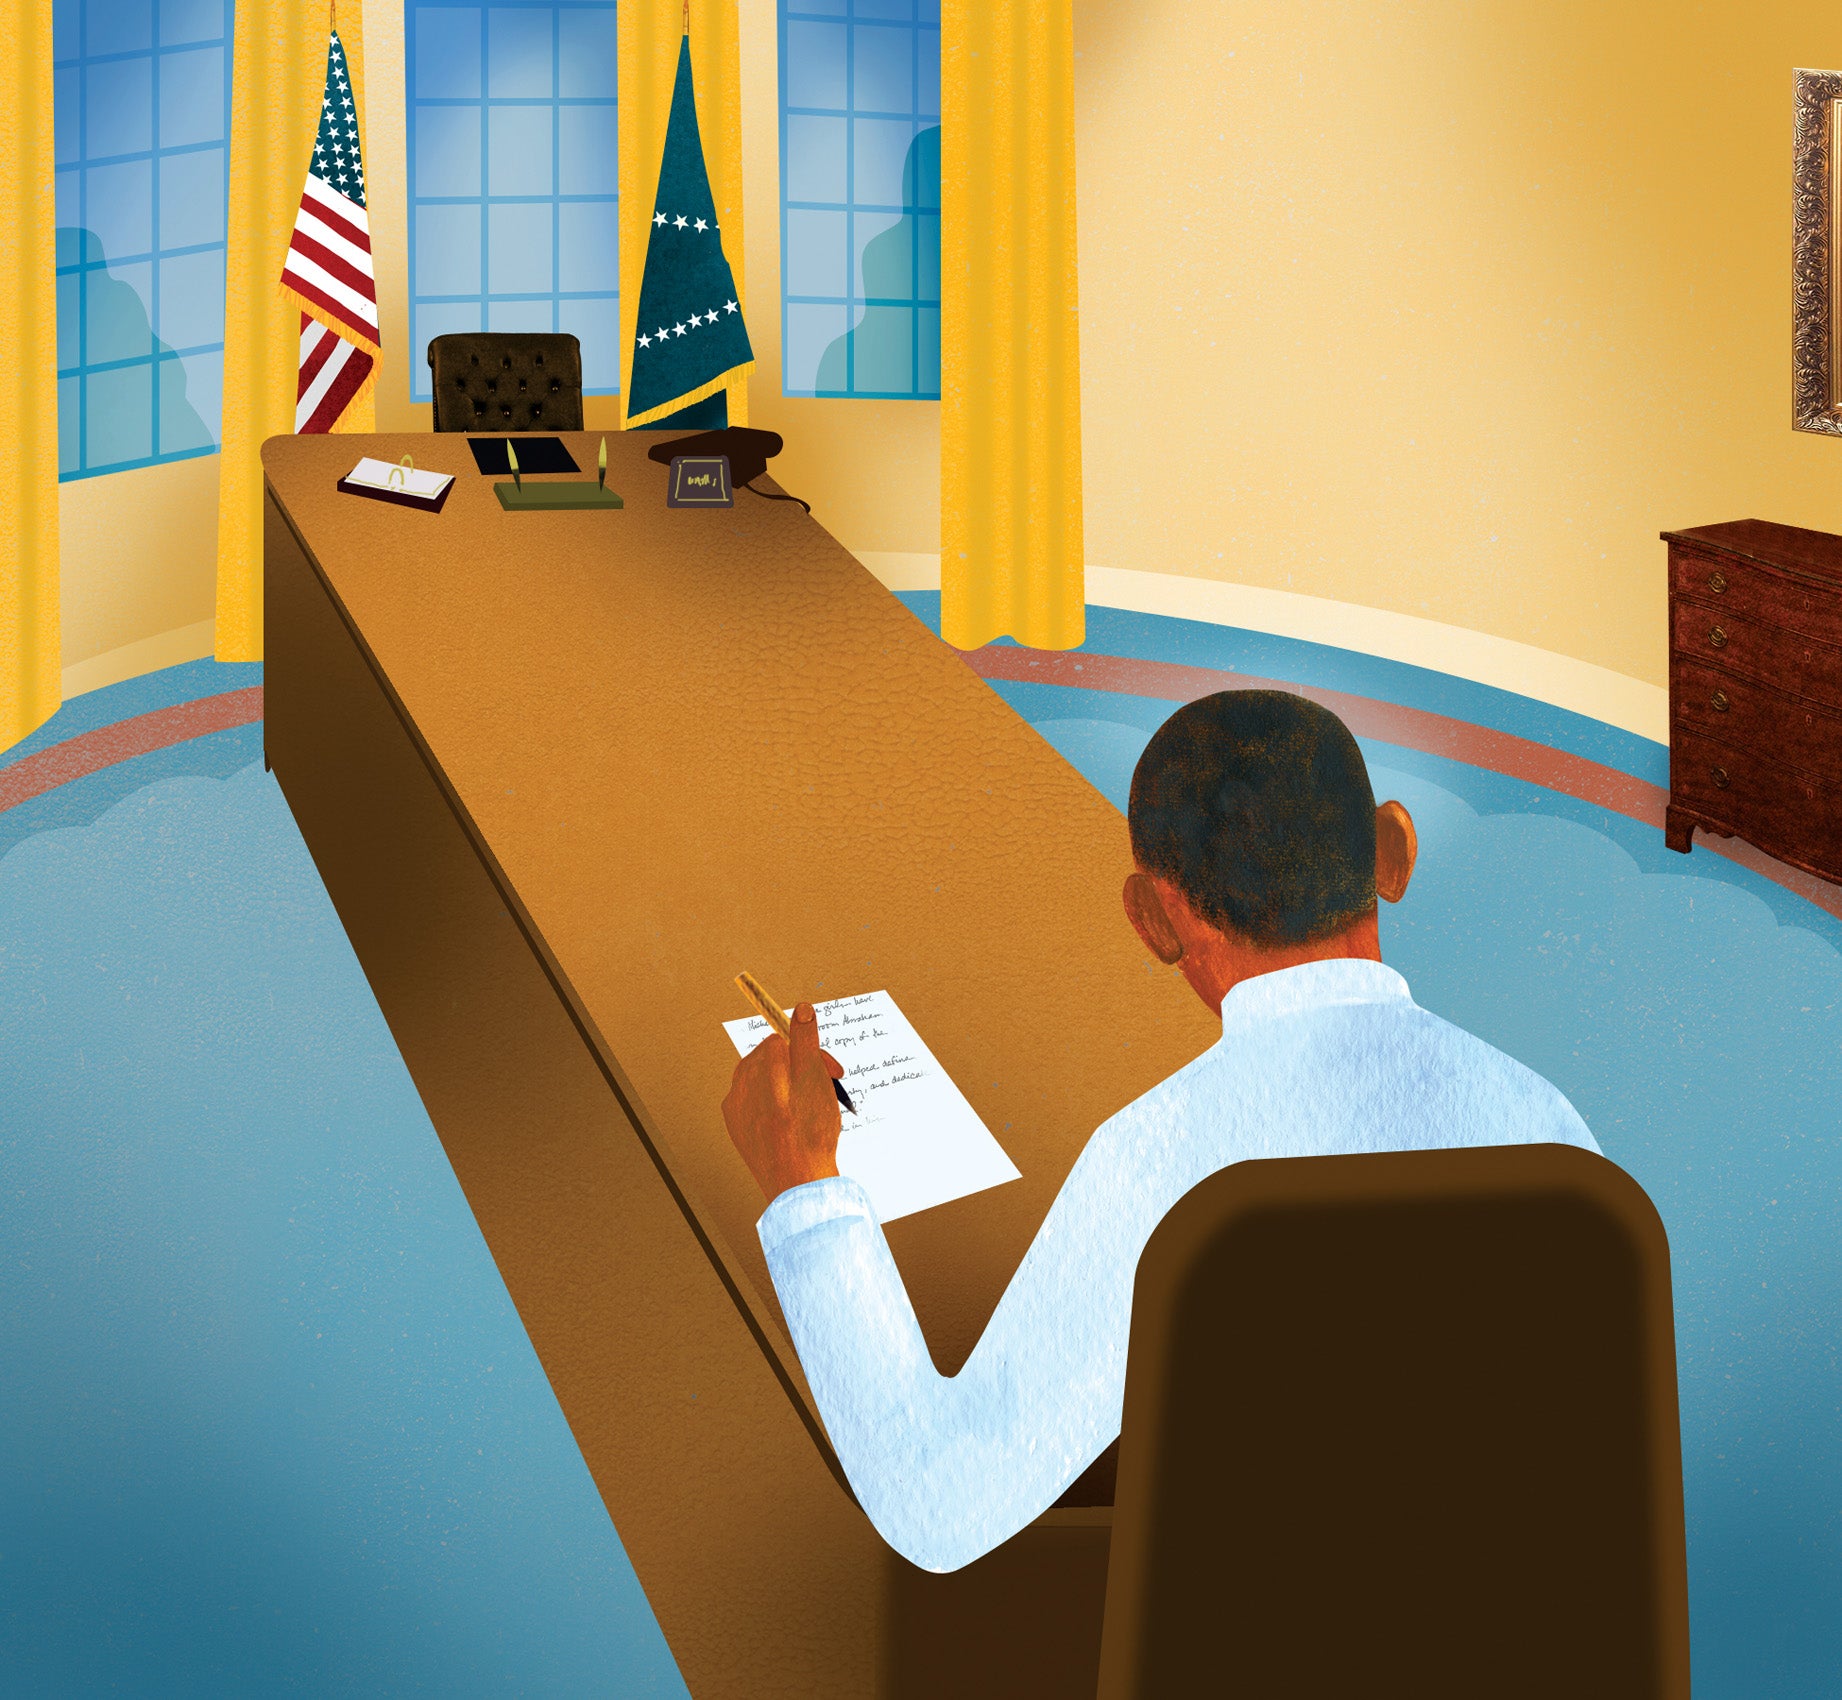 Illustration of man at the end of a long table sitting in a chair and writing on a piece of paper in the White House oval office